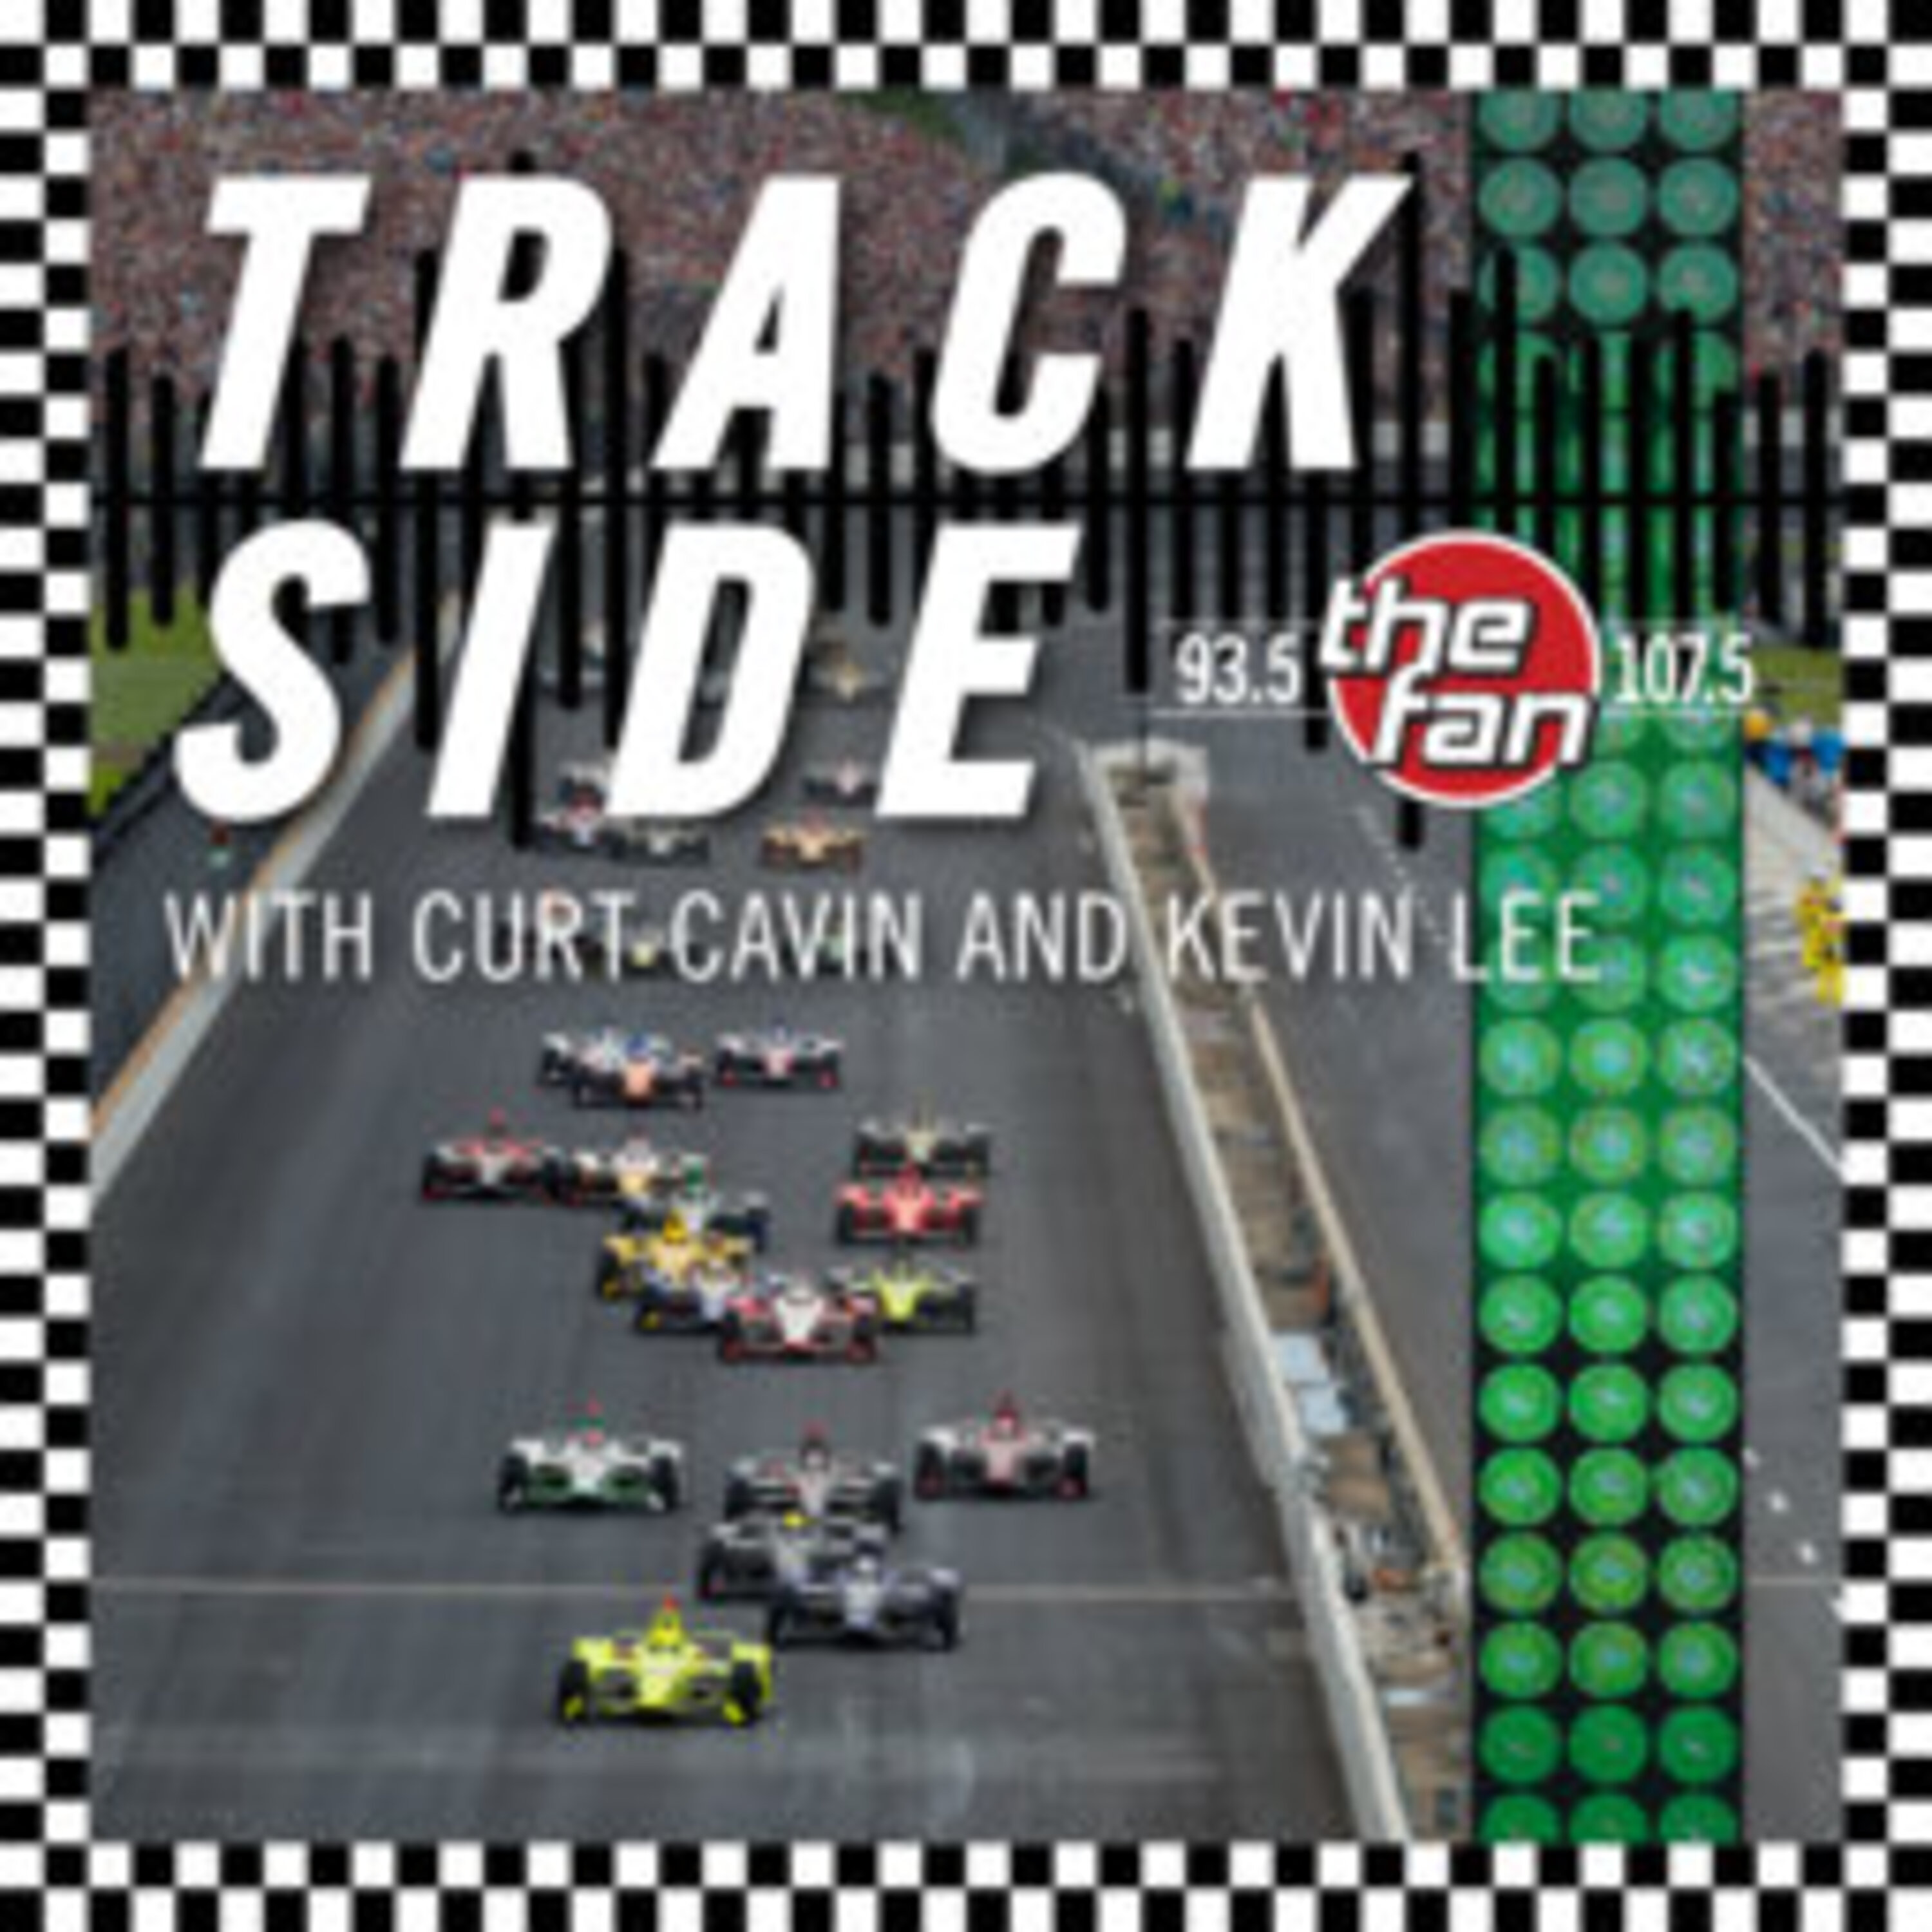 Curt and Kevin breakdown the first day of practice, who was fastest, on-track rivalries, and more!